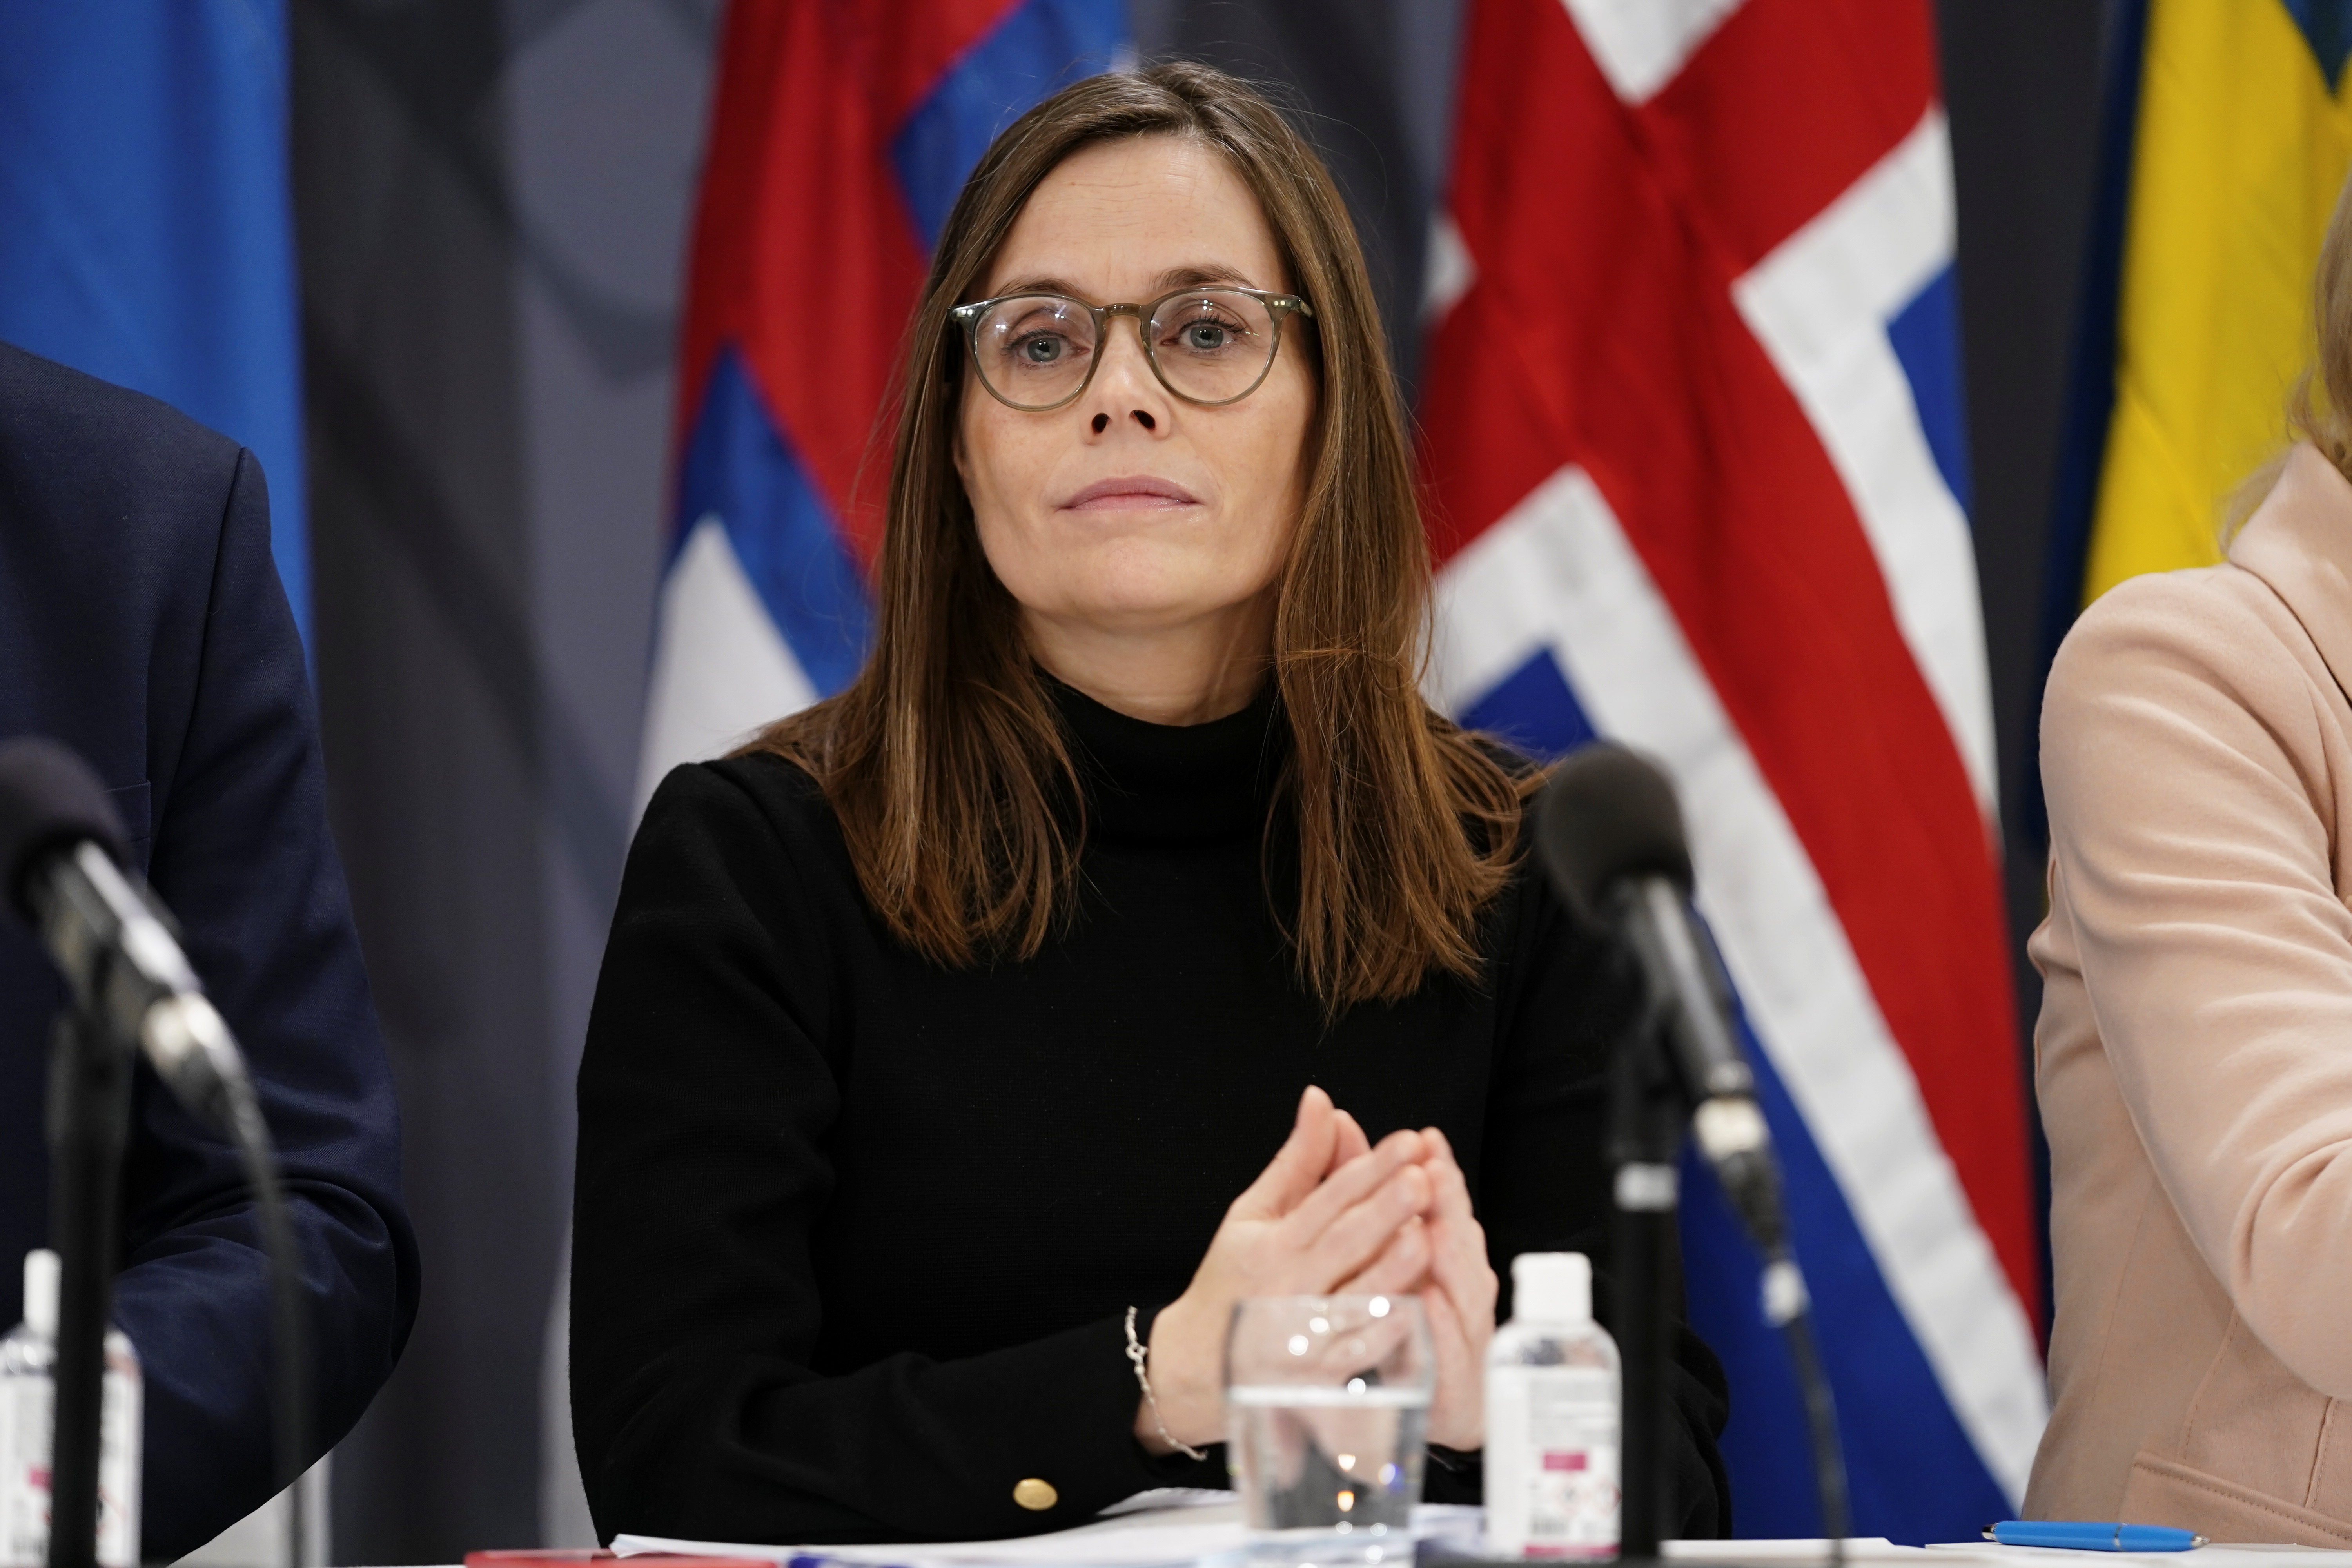 Iceland's Prime Minister Katrin Jakobsdottir attends a press conference in the Prime Ministers Office in Copenhagen during the Nordic Council Session 2021 in Copenhagen, Denmark November 3, 2021. Mads Claus Rasmussen/Ritzau Scanpix/via REUTERS    